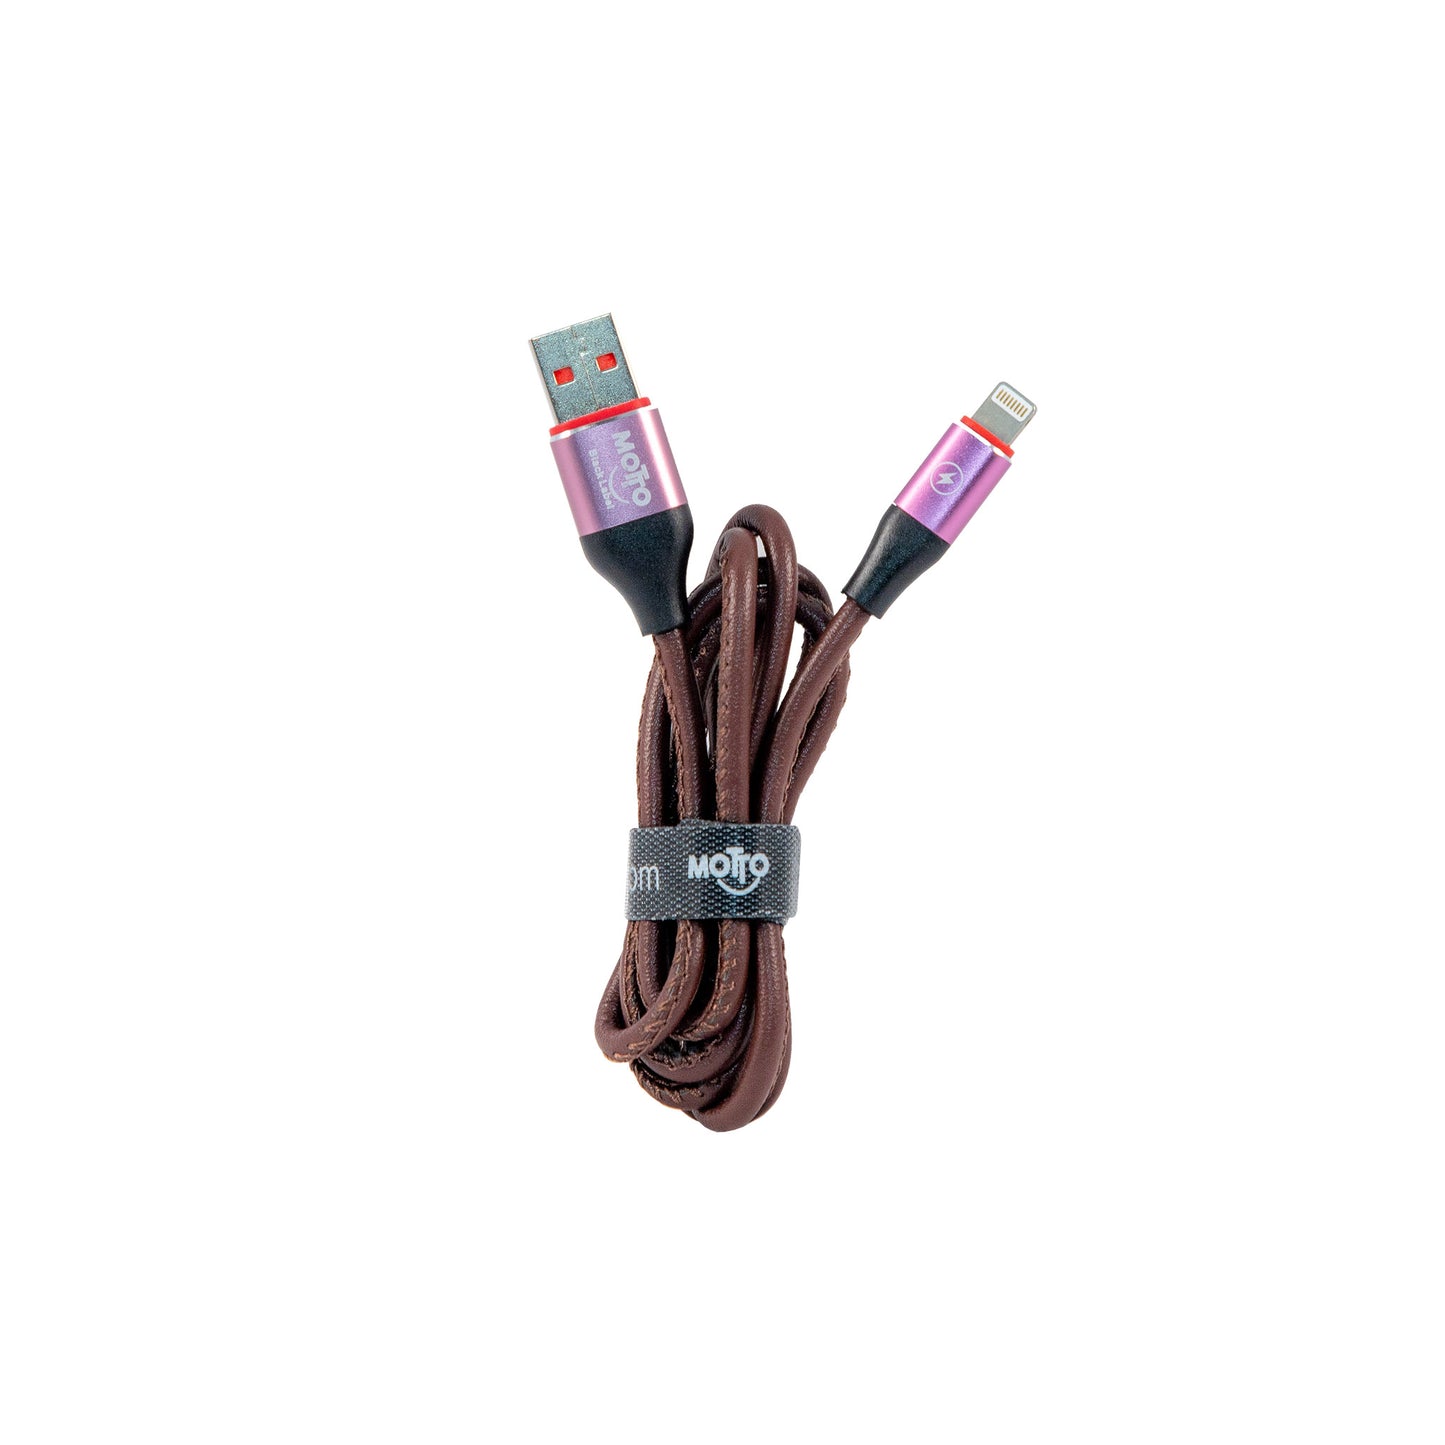 Motto Leather Wrapped Lightning iPhone Cable